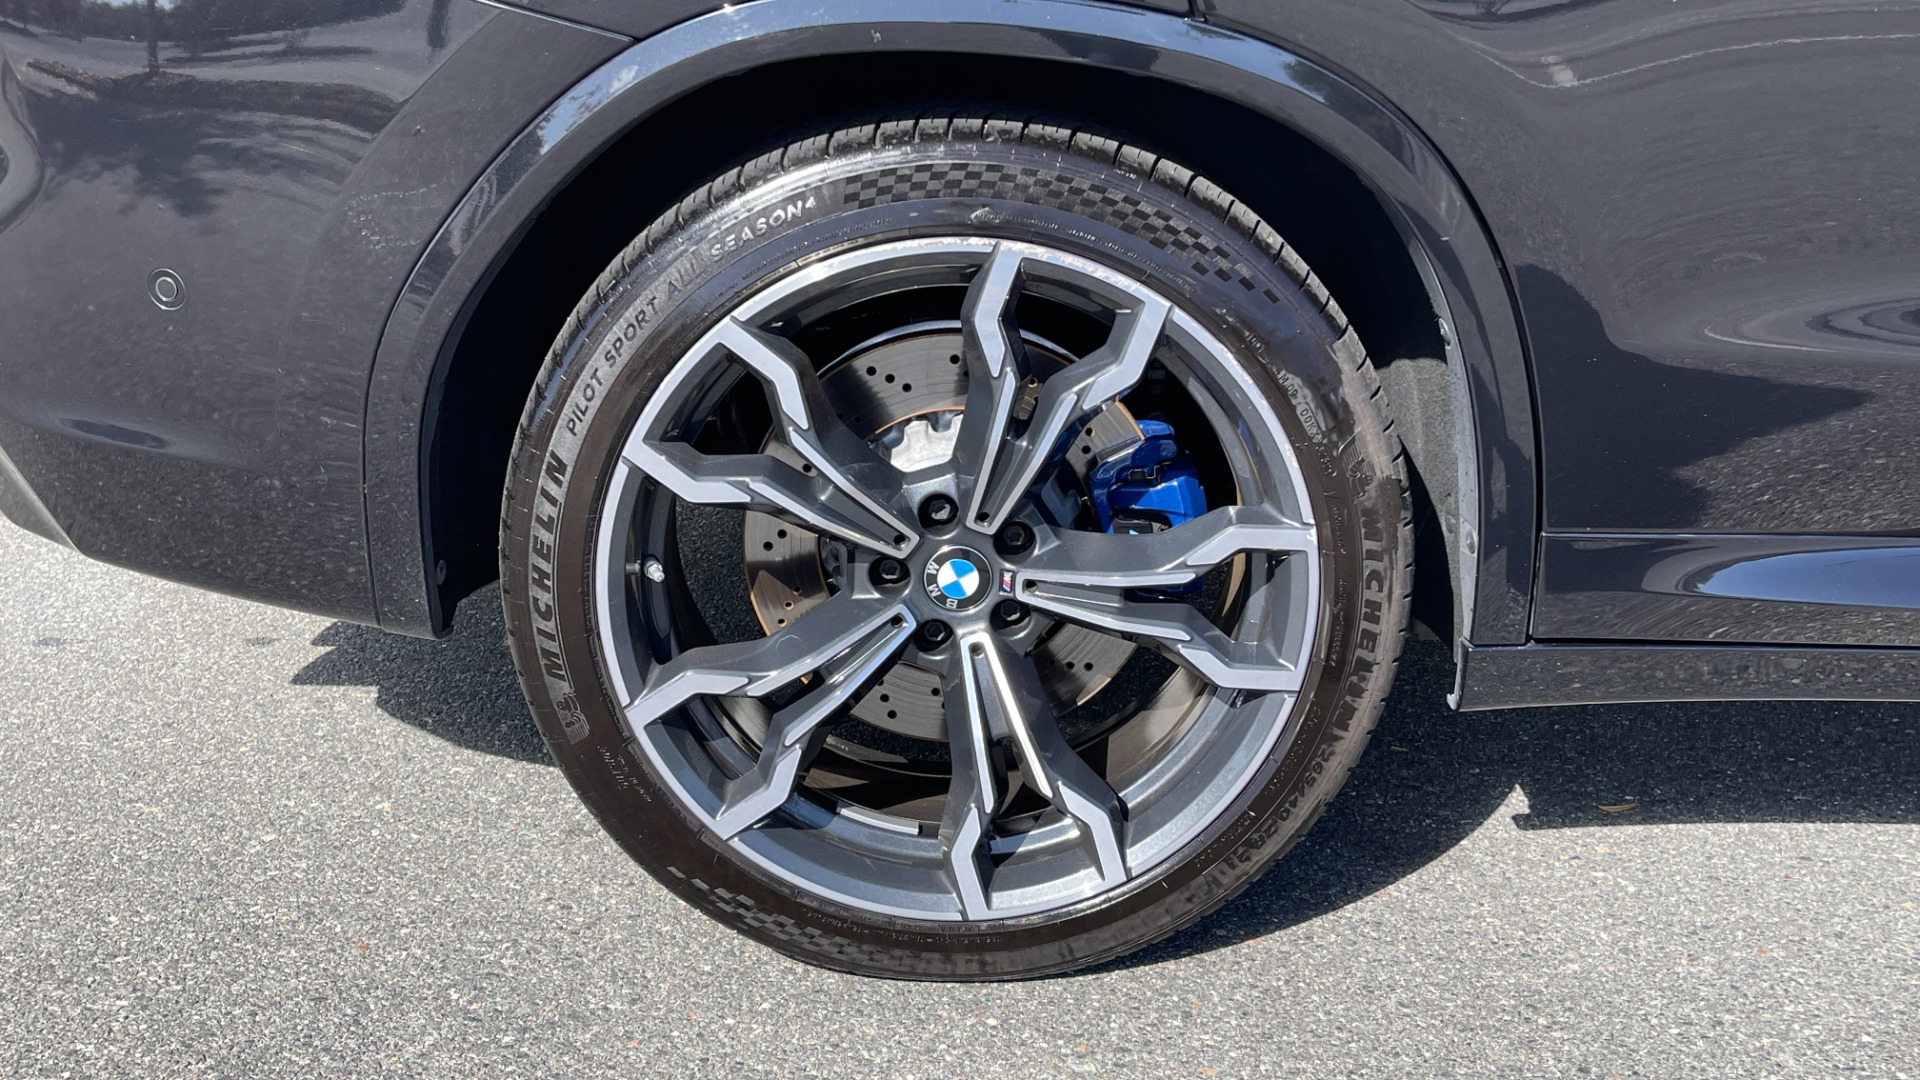 Used 2020 BMW X3 M MERINO LEATHER / EXECUTIVE PACKAGE / DINAN EXHAUST for sale $58,999 at Formula Imports in Charlotte NC 28227 46